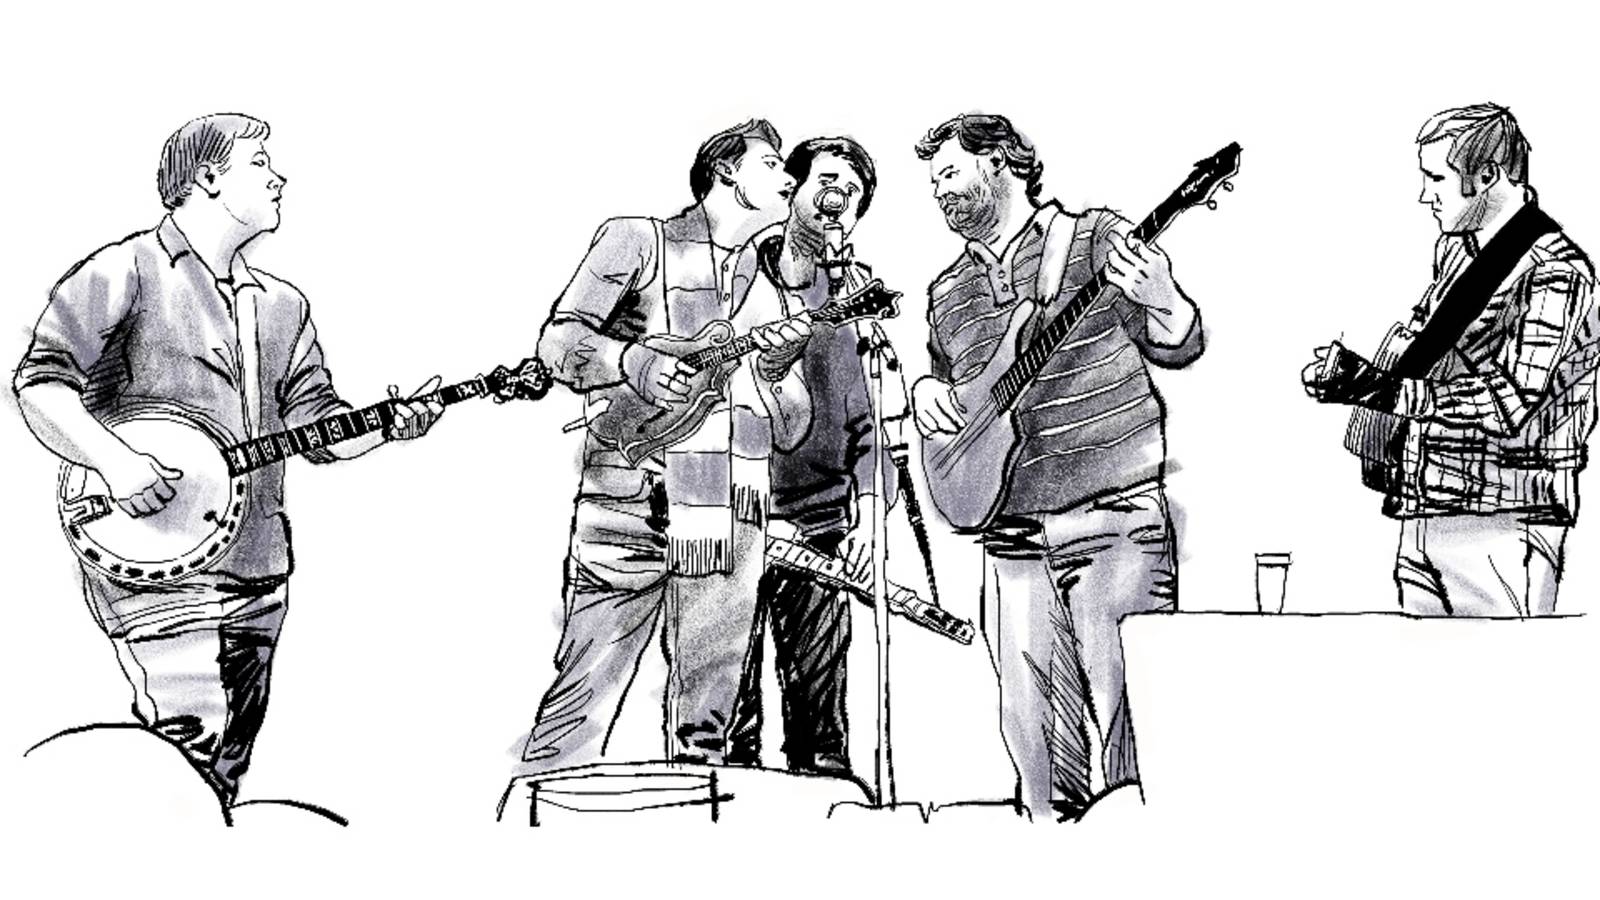 <p>Gatlinburg provides a noisy and bustling contrast to the peace and quiet of the park. But sometimes the noise is pleasant indeed. Here, the bluegrass band Monroeville plays an outdoor concert.</p>